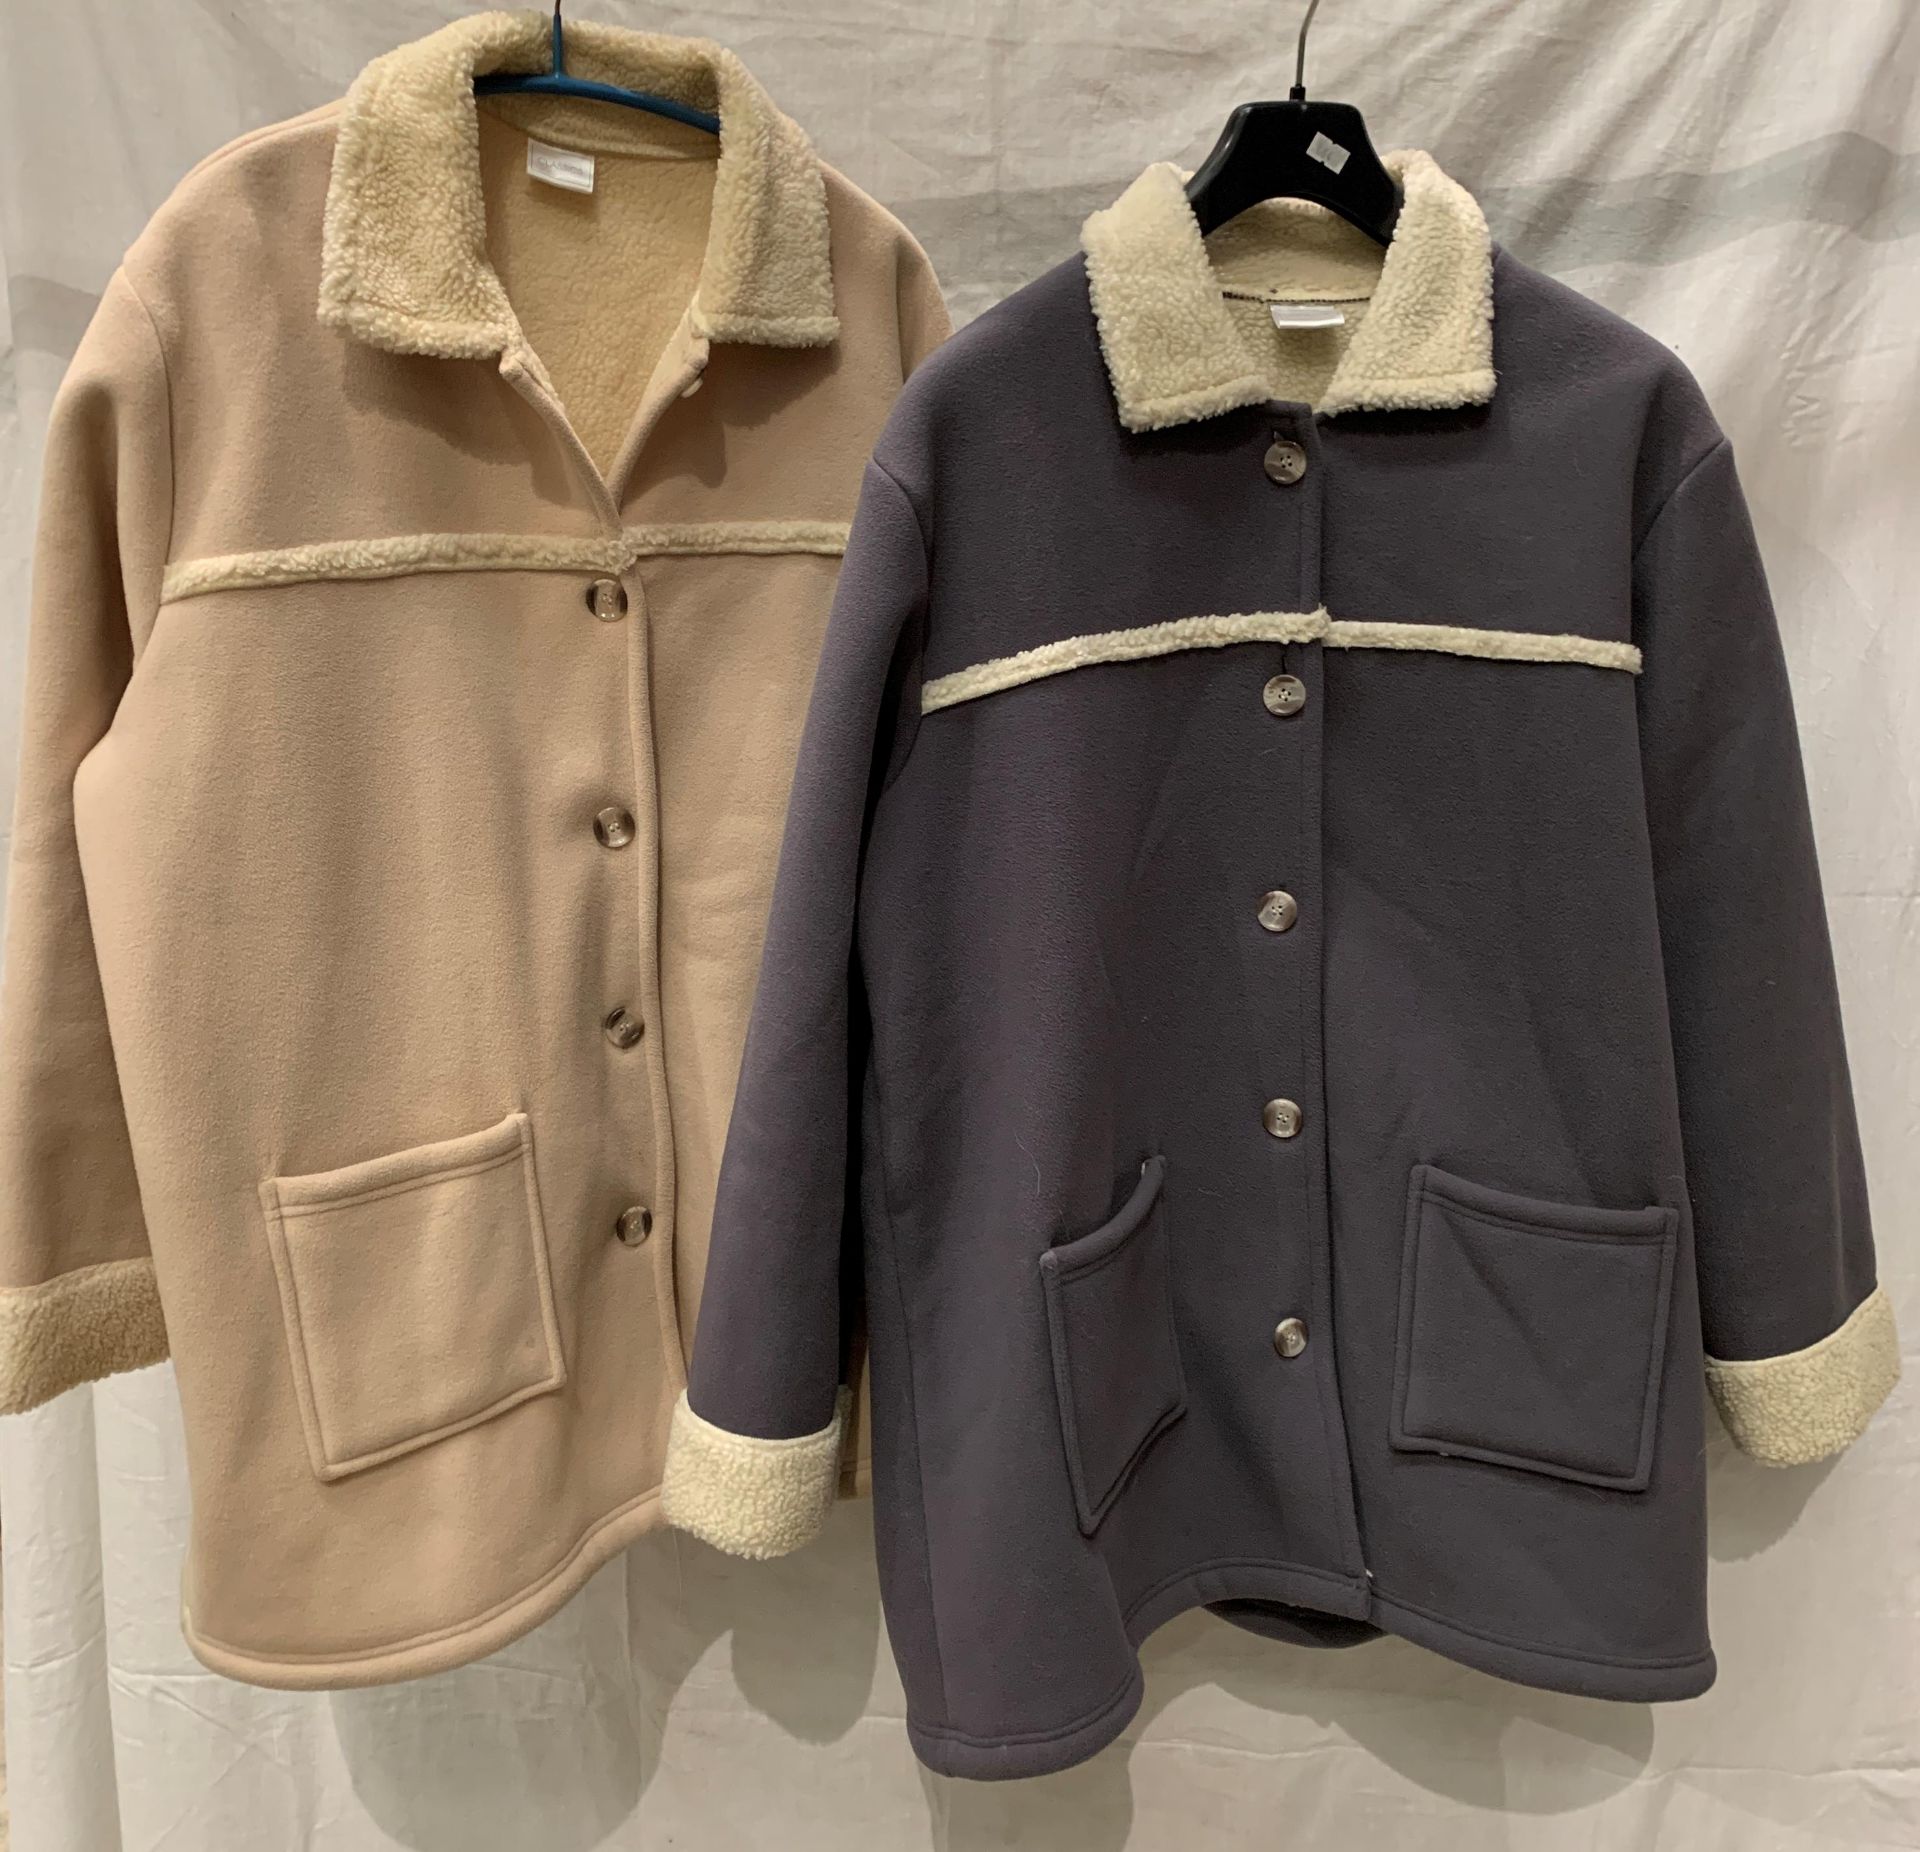 From a deceased estate - two ladies fleece jackets (grey and camel), with faux fur lining,